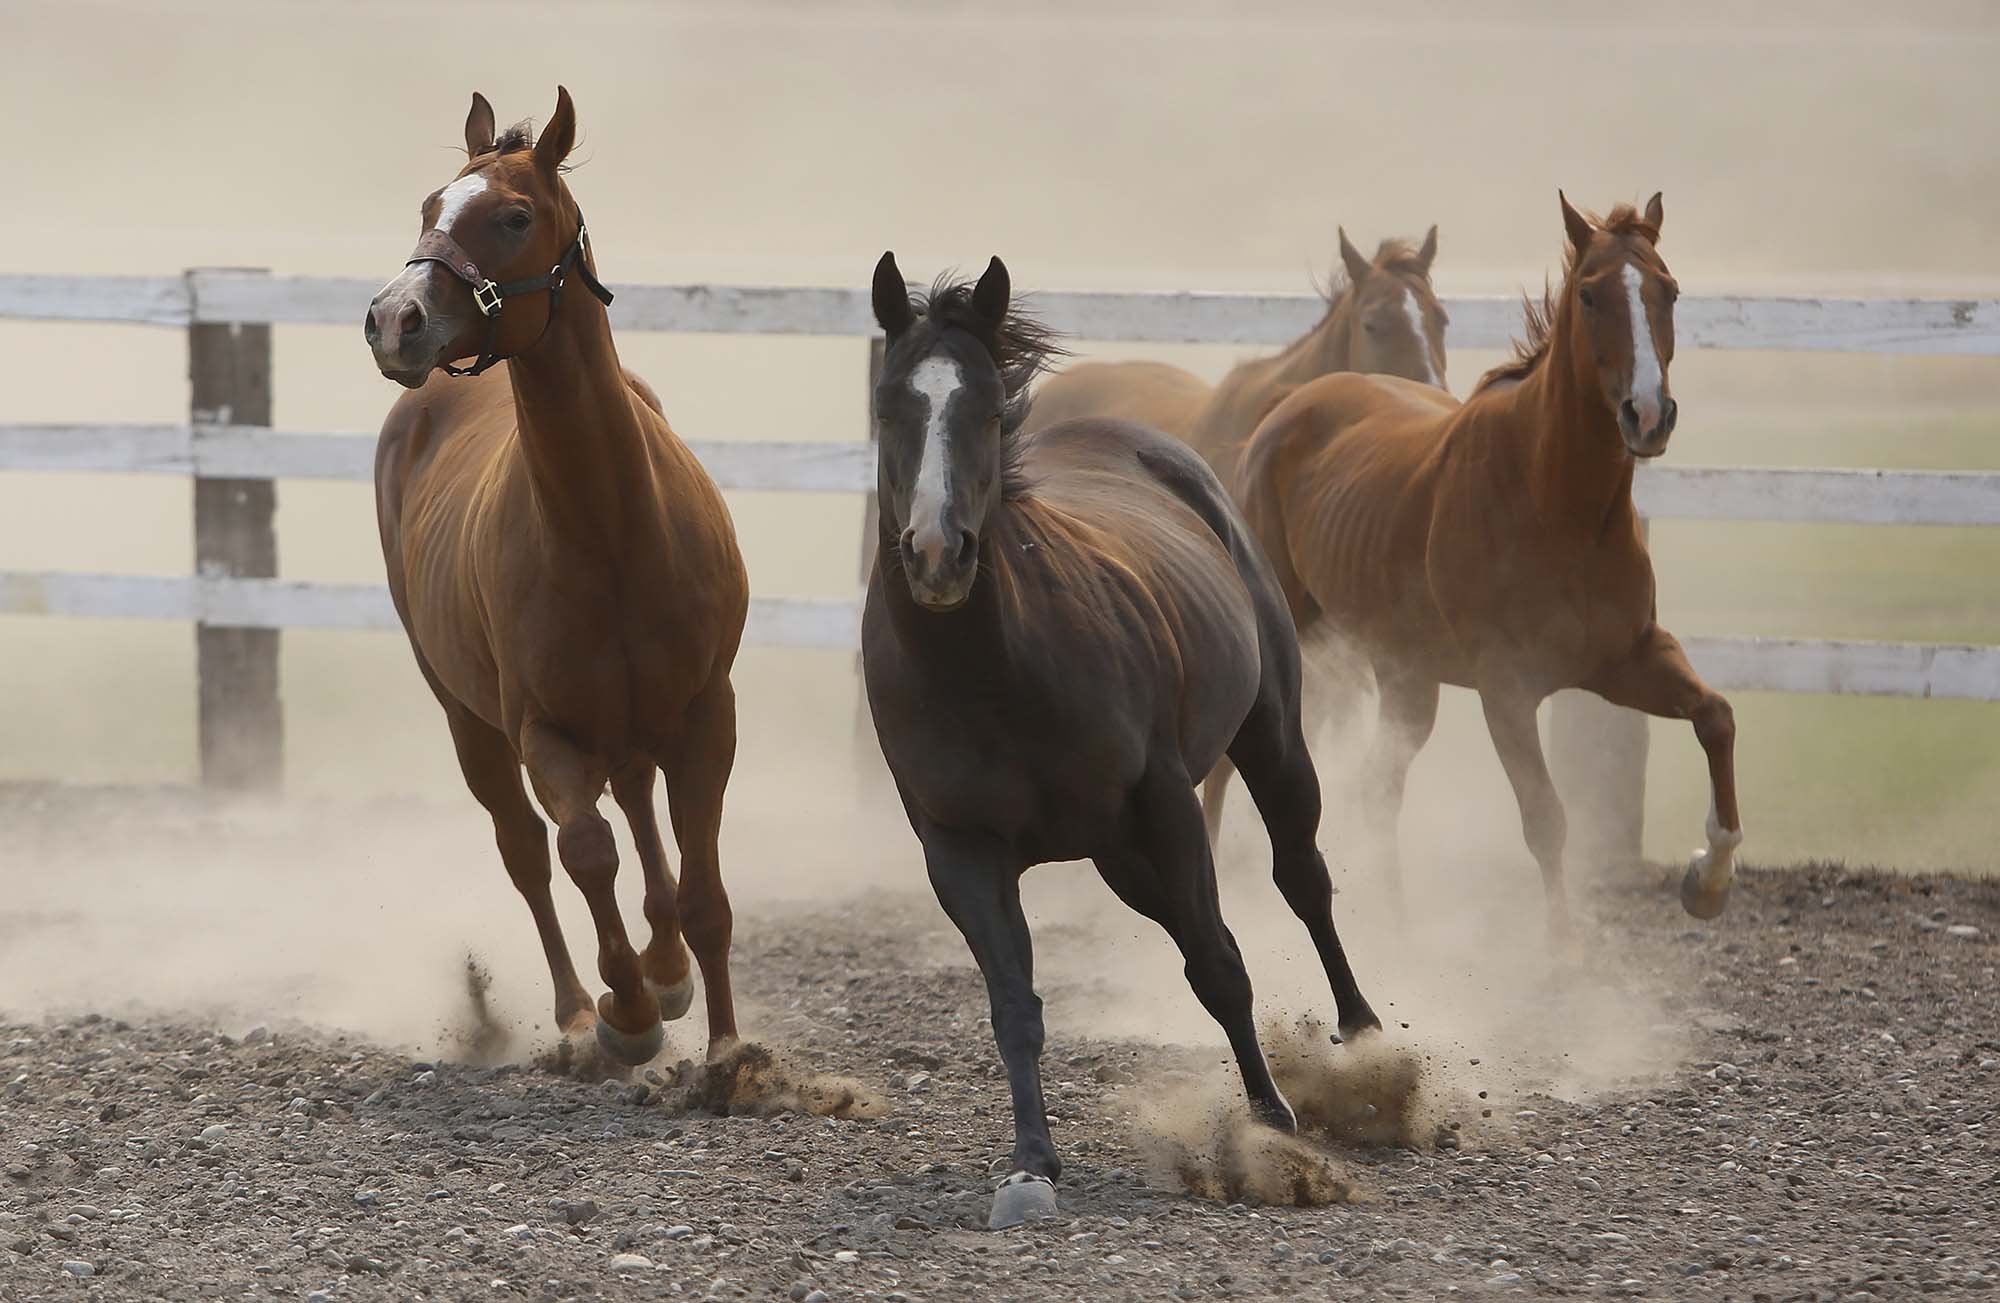  The Marchand family's horses get some exercise after spending three days in a pen after having been moved to the Okanogan County Fair Grounds last Wednesday because of wildfire danger in Okanogan, Wash., Friday, Aug. 21, 2015. 